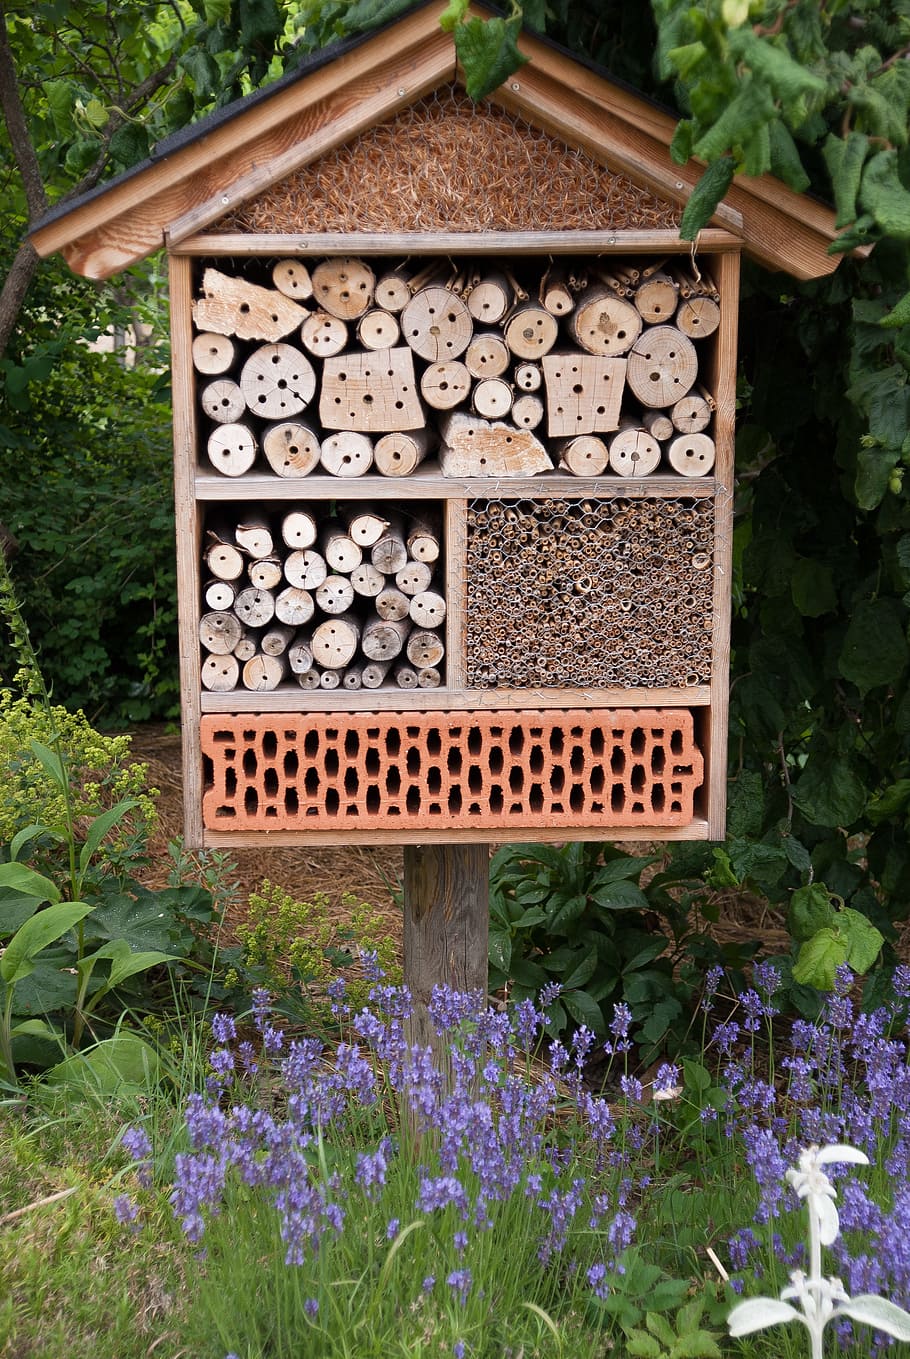 insect hotel, nützlingshotel, garden, plant, flower, flowering plant, growth, nature, day, beauty in nature